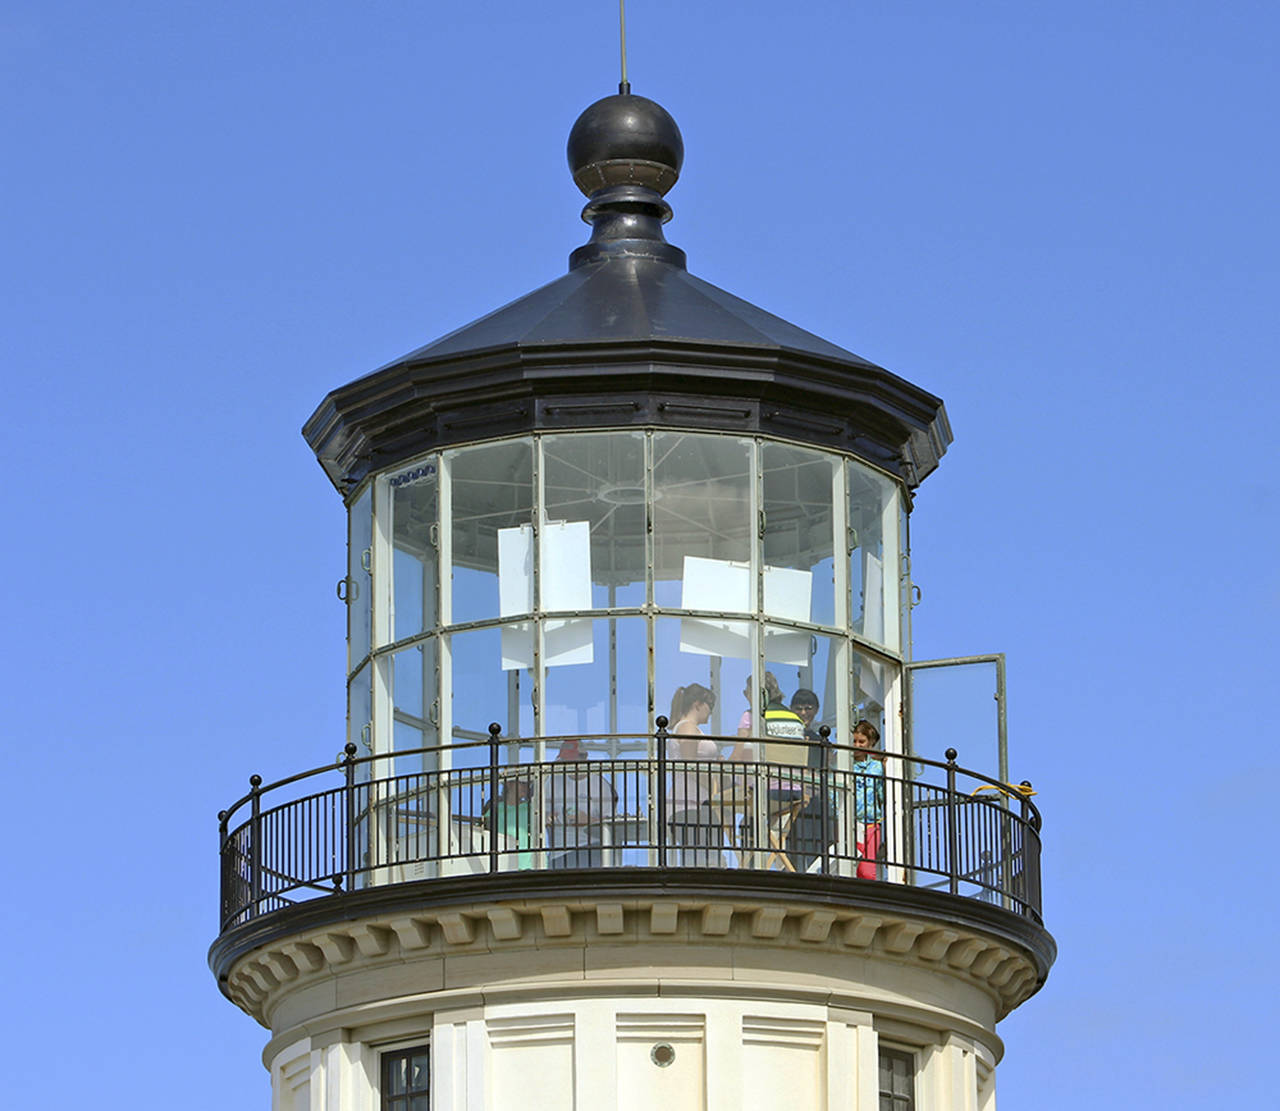 On a clear day, the view is worth the climb. In the observation room of the North Head Lighthouse in Ilwaco, visitors point to sights and wave at family members below.